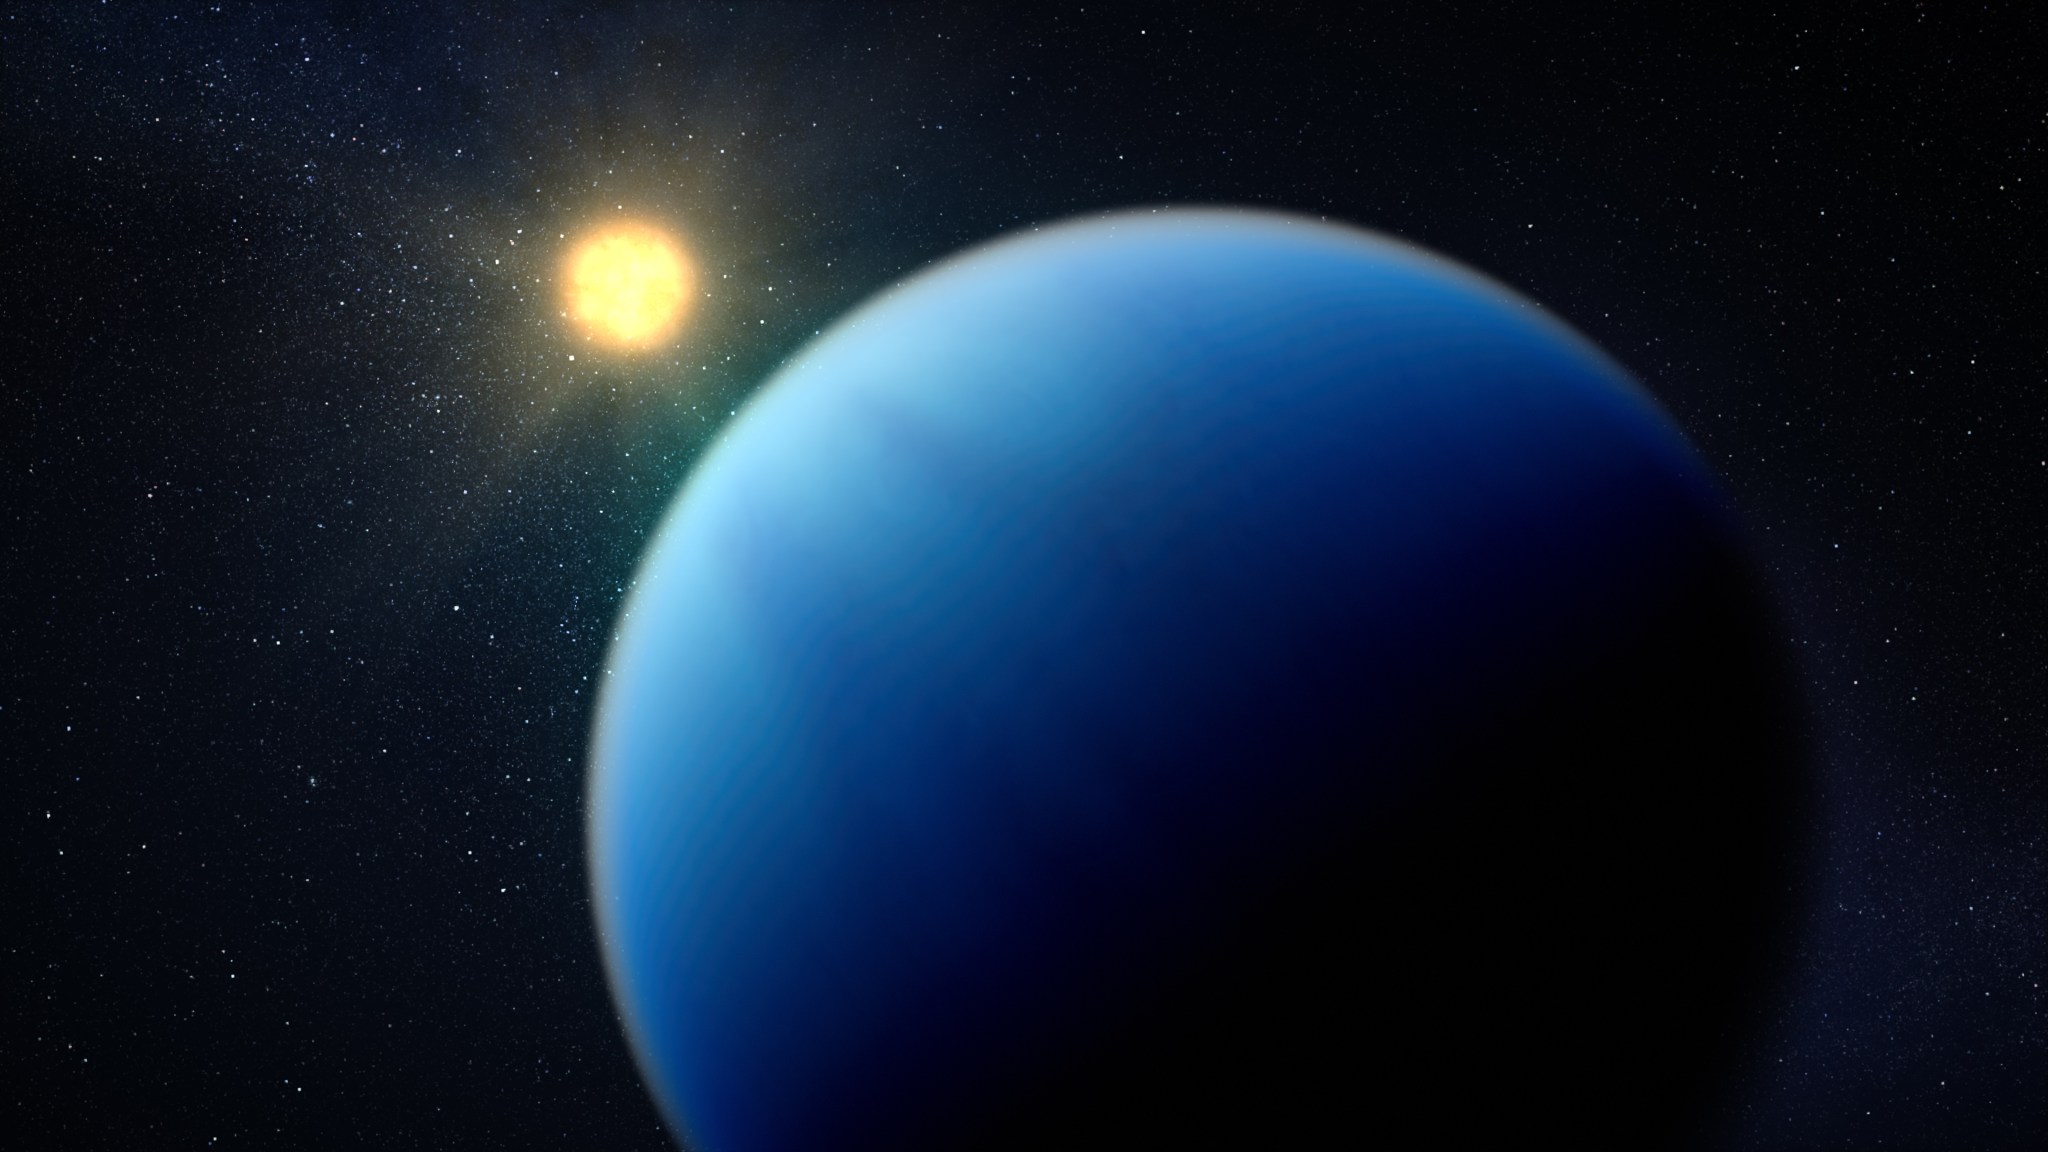 illustration of blue-hued planet illuminated by a yellow-hued star, against the black backdrop of space